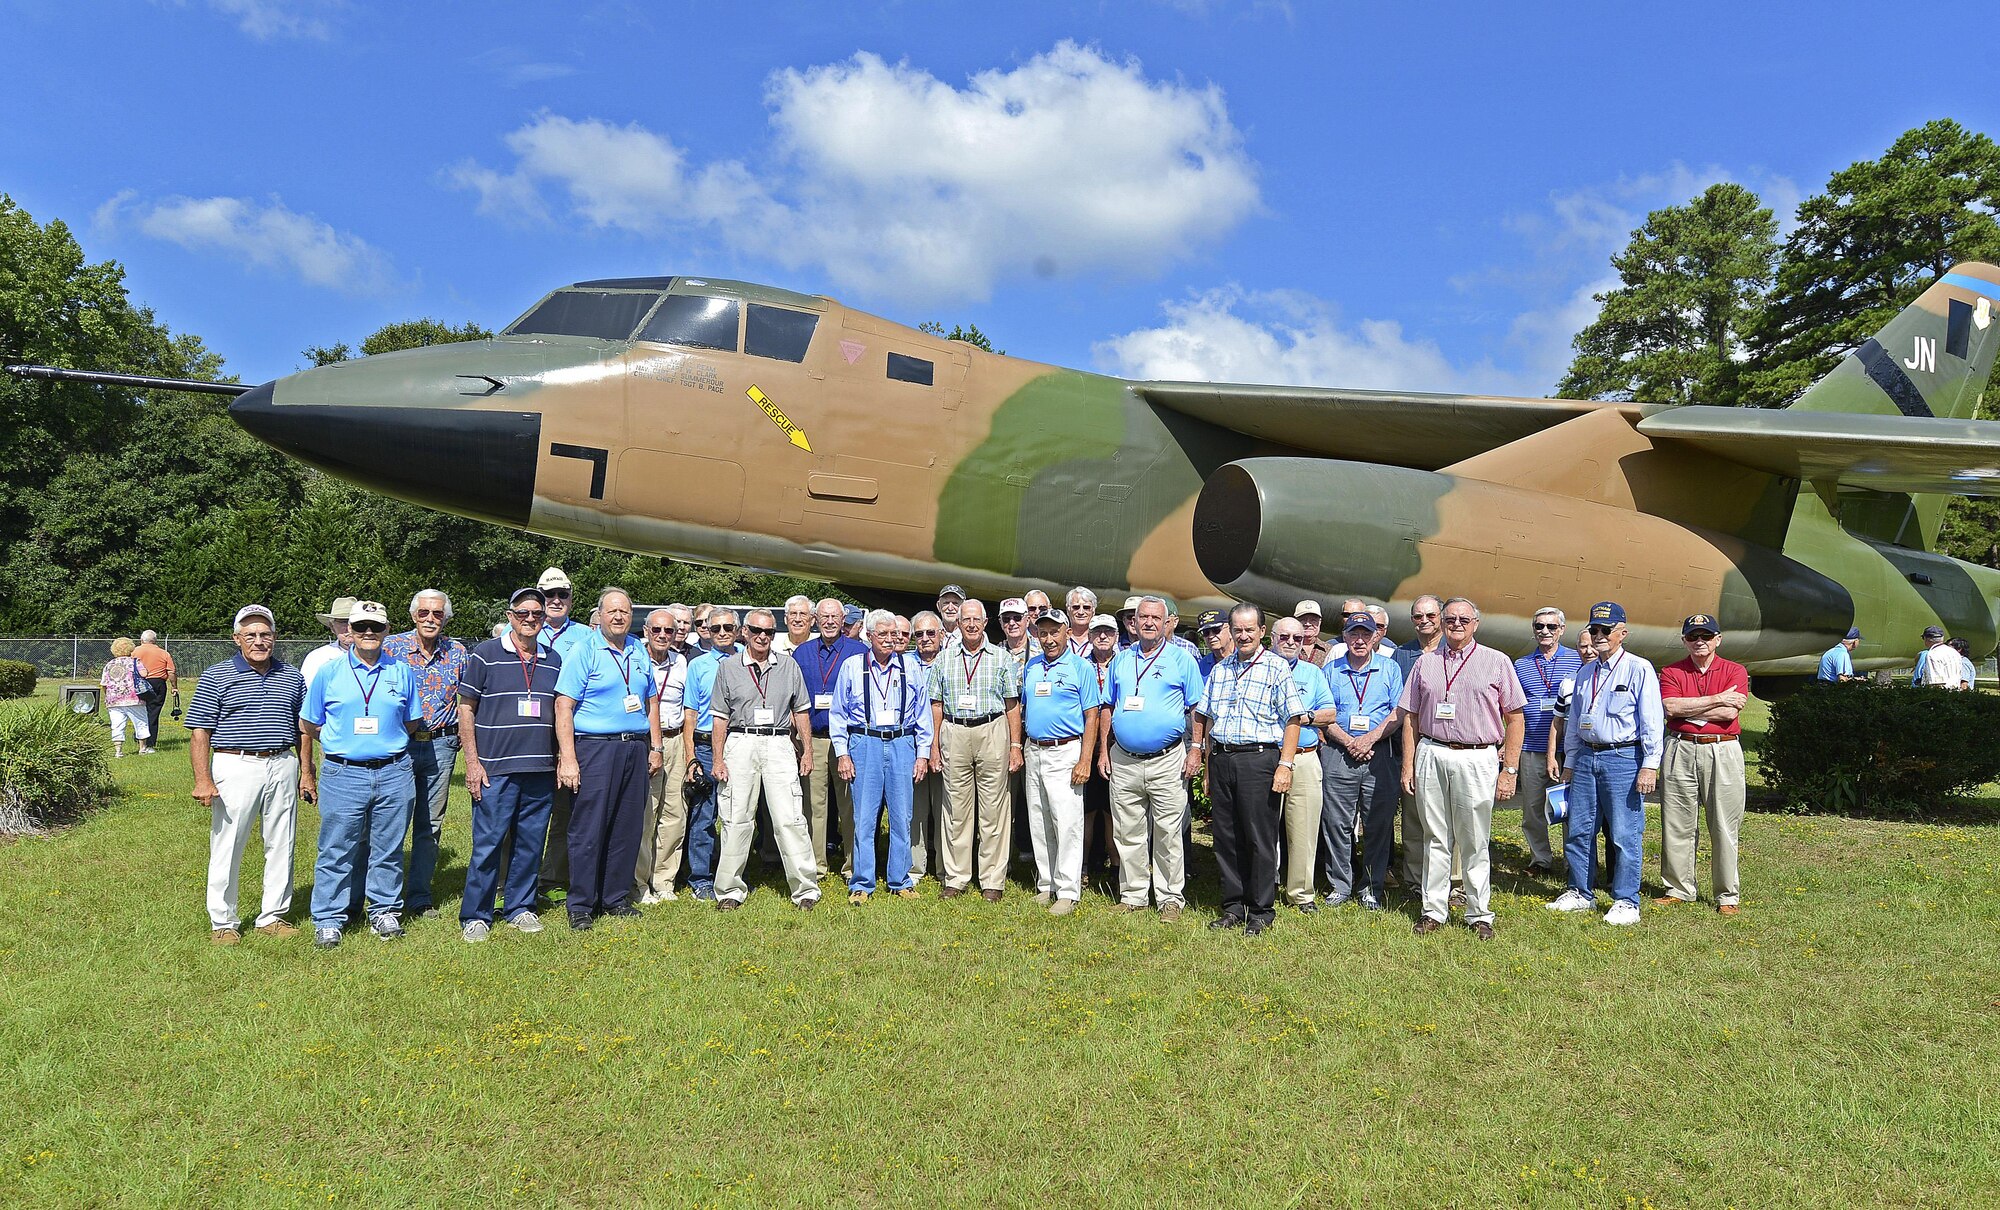 U.S. Air Force retired B-66 Destroyer aircraft crew members and pilots pose for a picture in front of a B-66 static display at Shaw Air Force Base, S.C., Aug. 30, 2016. The B-66 was a combat-ready light bomber that retained a three-man crew used by the USAF between the years of 1952 to 1966. (U.S. Air Force photo by Airman BrieAnna Stillman) 